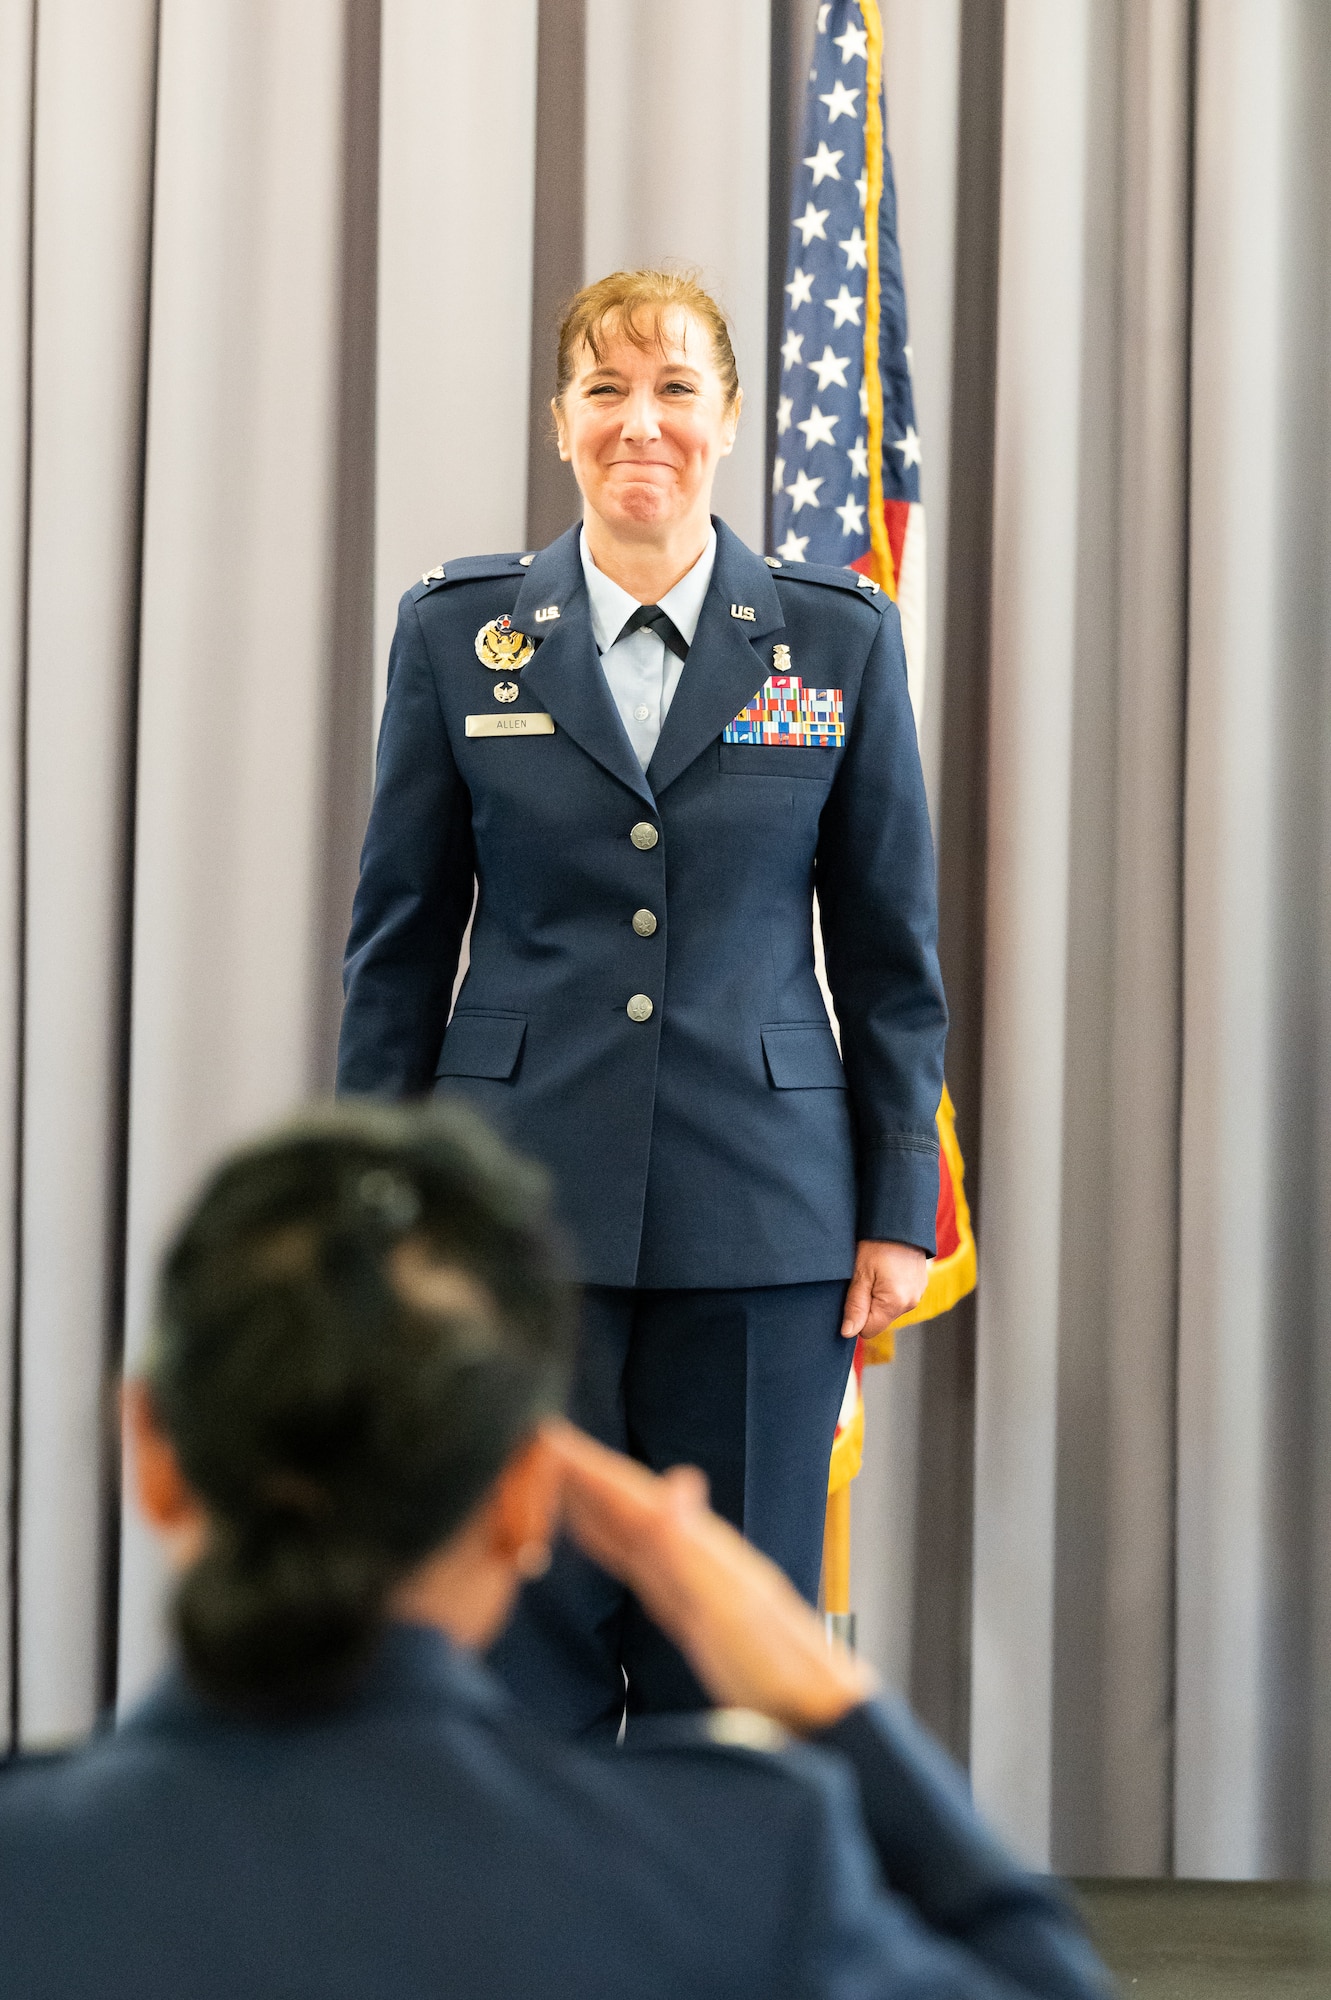 Col. Tracy Allen, outgoing 436th Medical Group commander, receives a final salute from her unit during the 436th MDG Change of Command ceremony at Dover Air Force Base, Delaware, June 9, 2022. During the ceremony Allen relinquished command of the 436th MDG to Col. Peggy Dickson. (U.S. Air Force photo by Mauricio Campino)